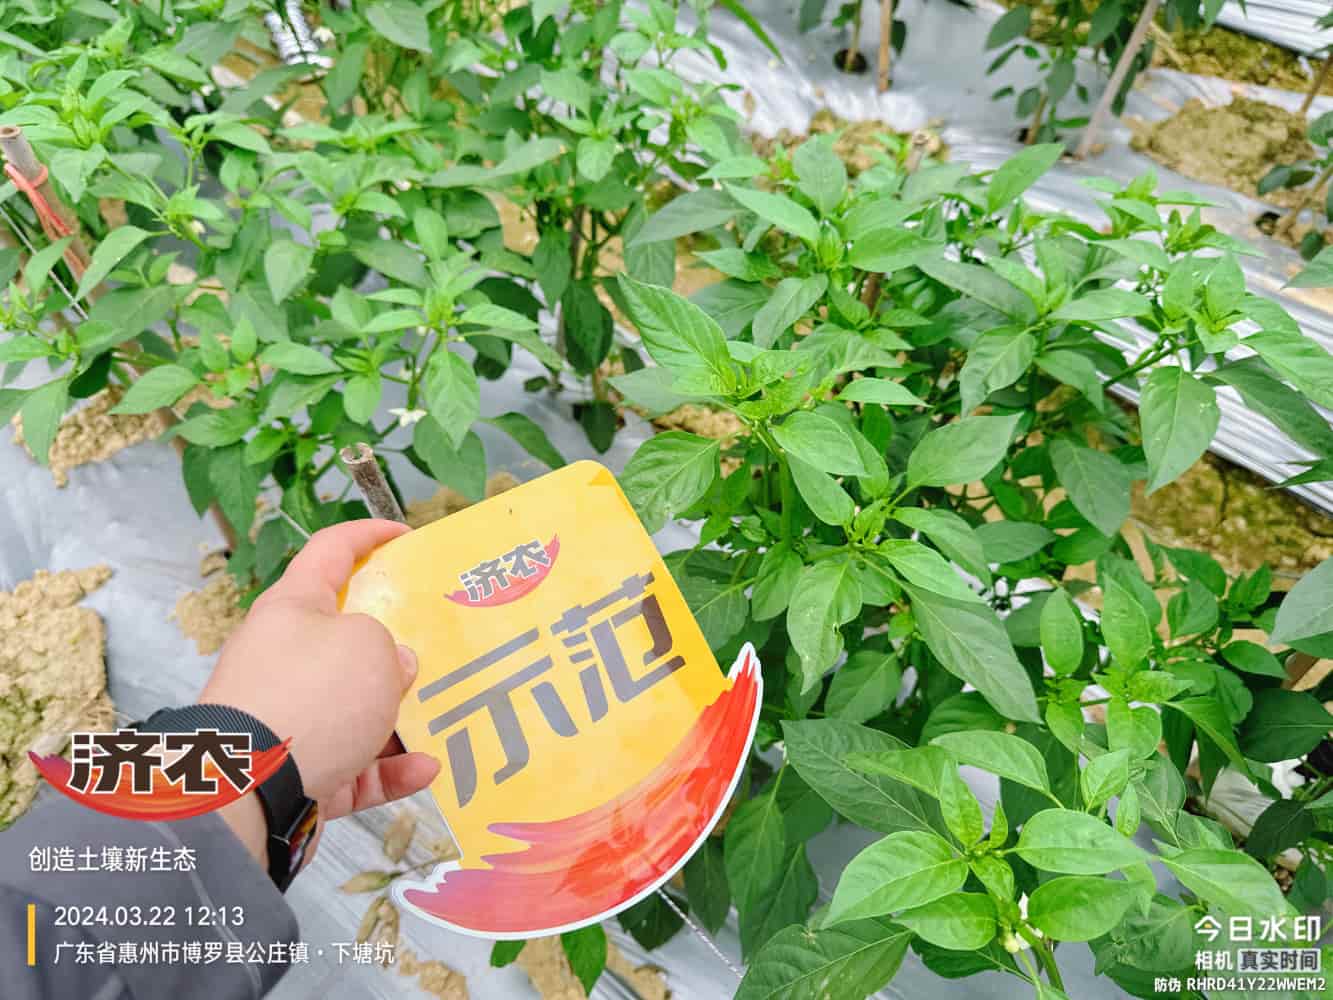 The effect of using agricultural products in Guangdong chili peppers(图5)